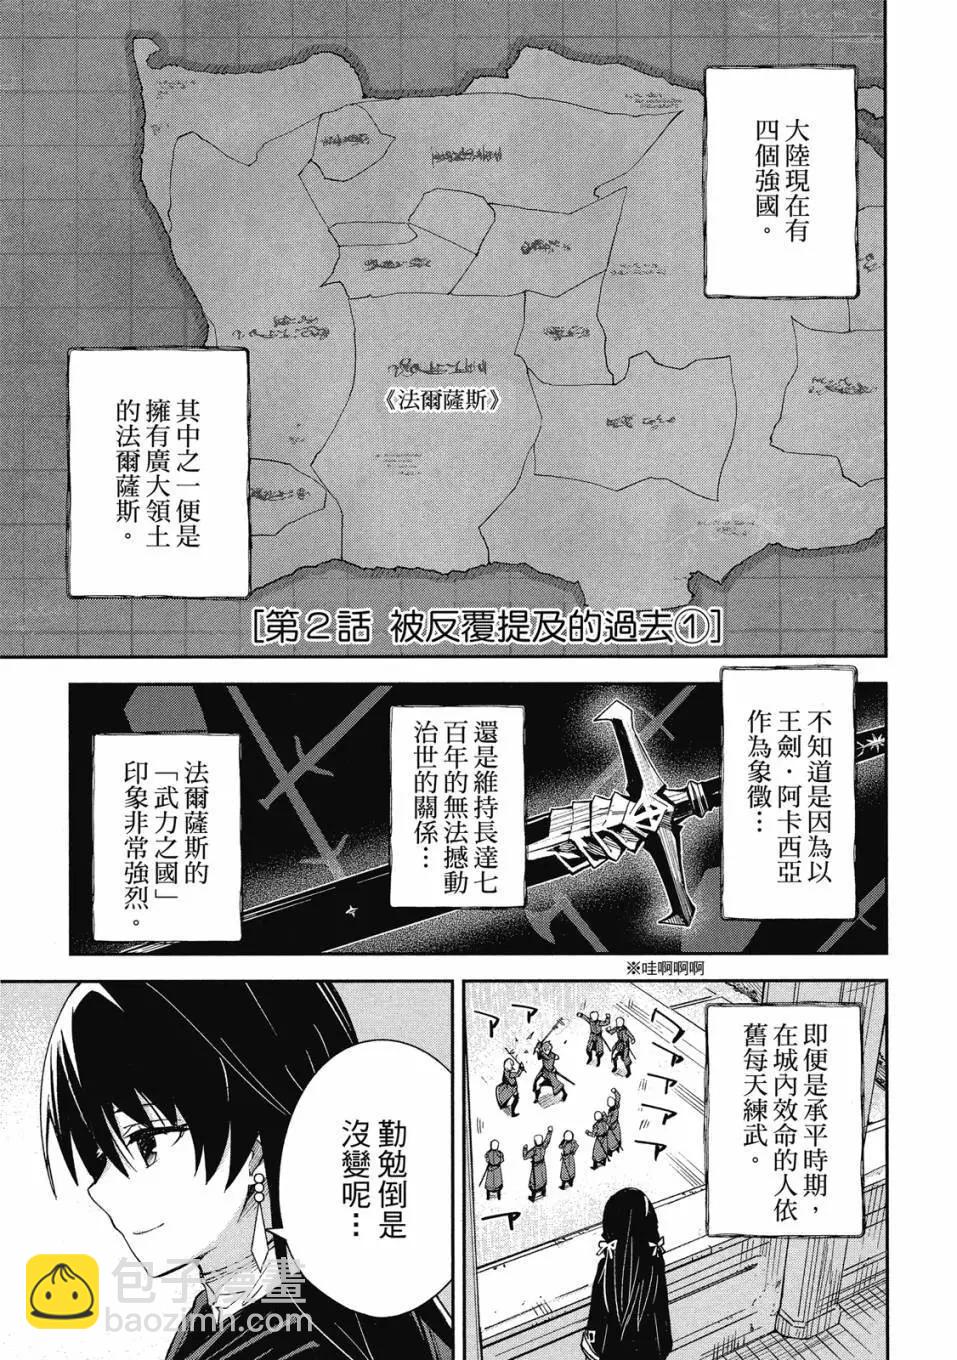 Unnamed Memory - 第01卷(2/4) - 6